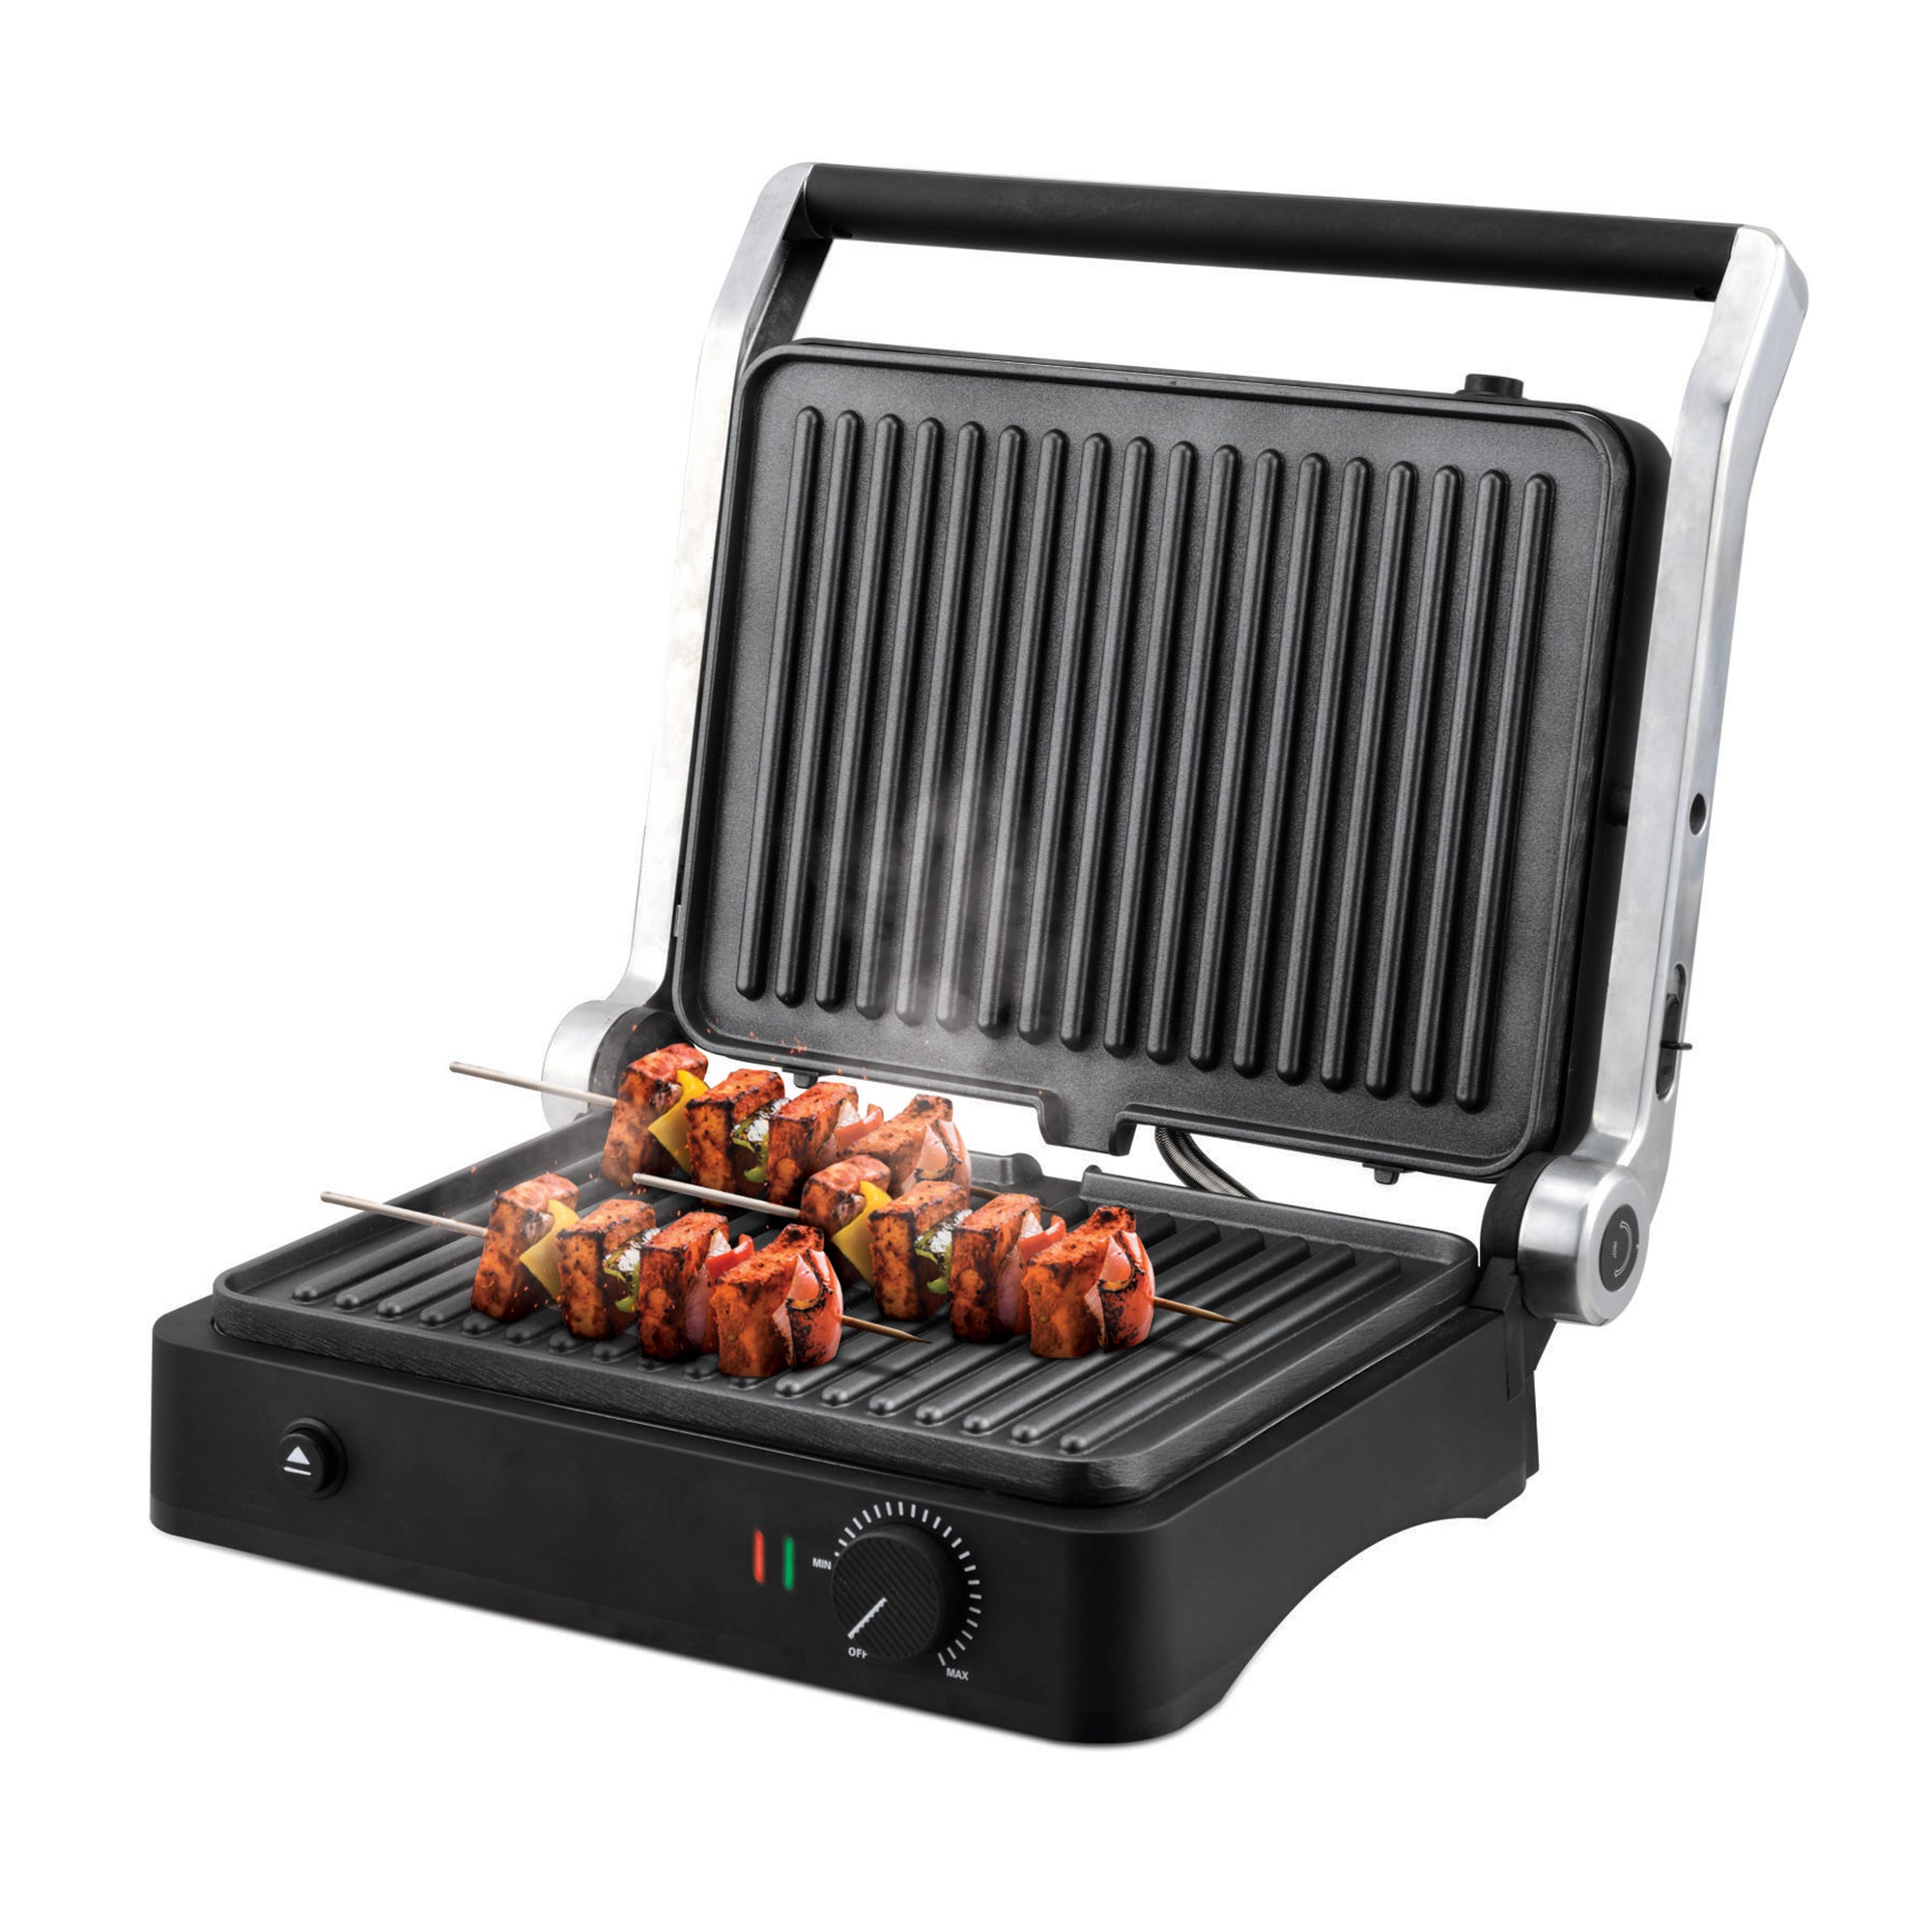 Warmex Home Appliances Grill Master with 180° Rotation warmexhomeappliances2